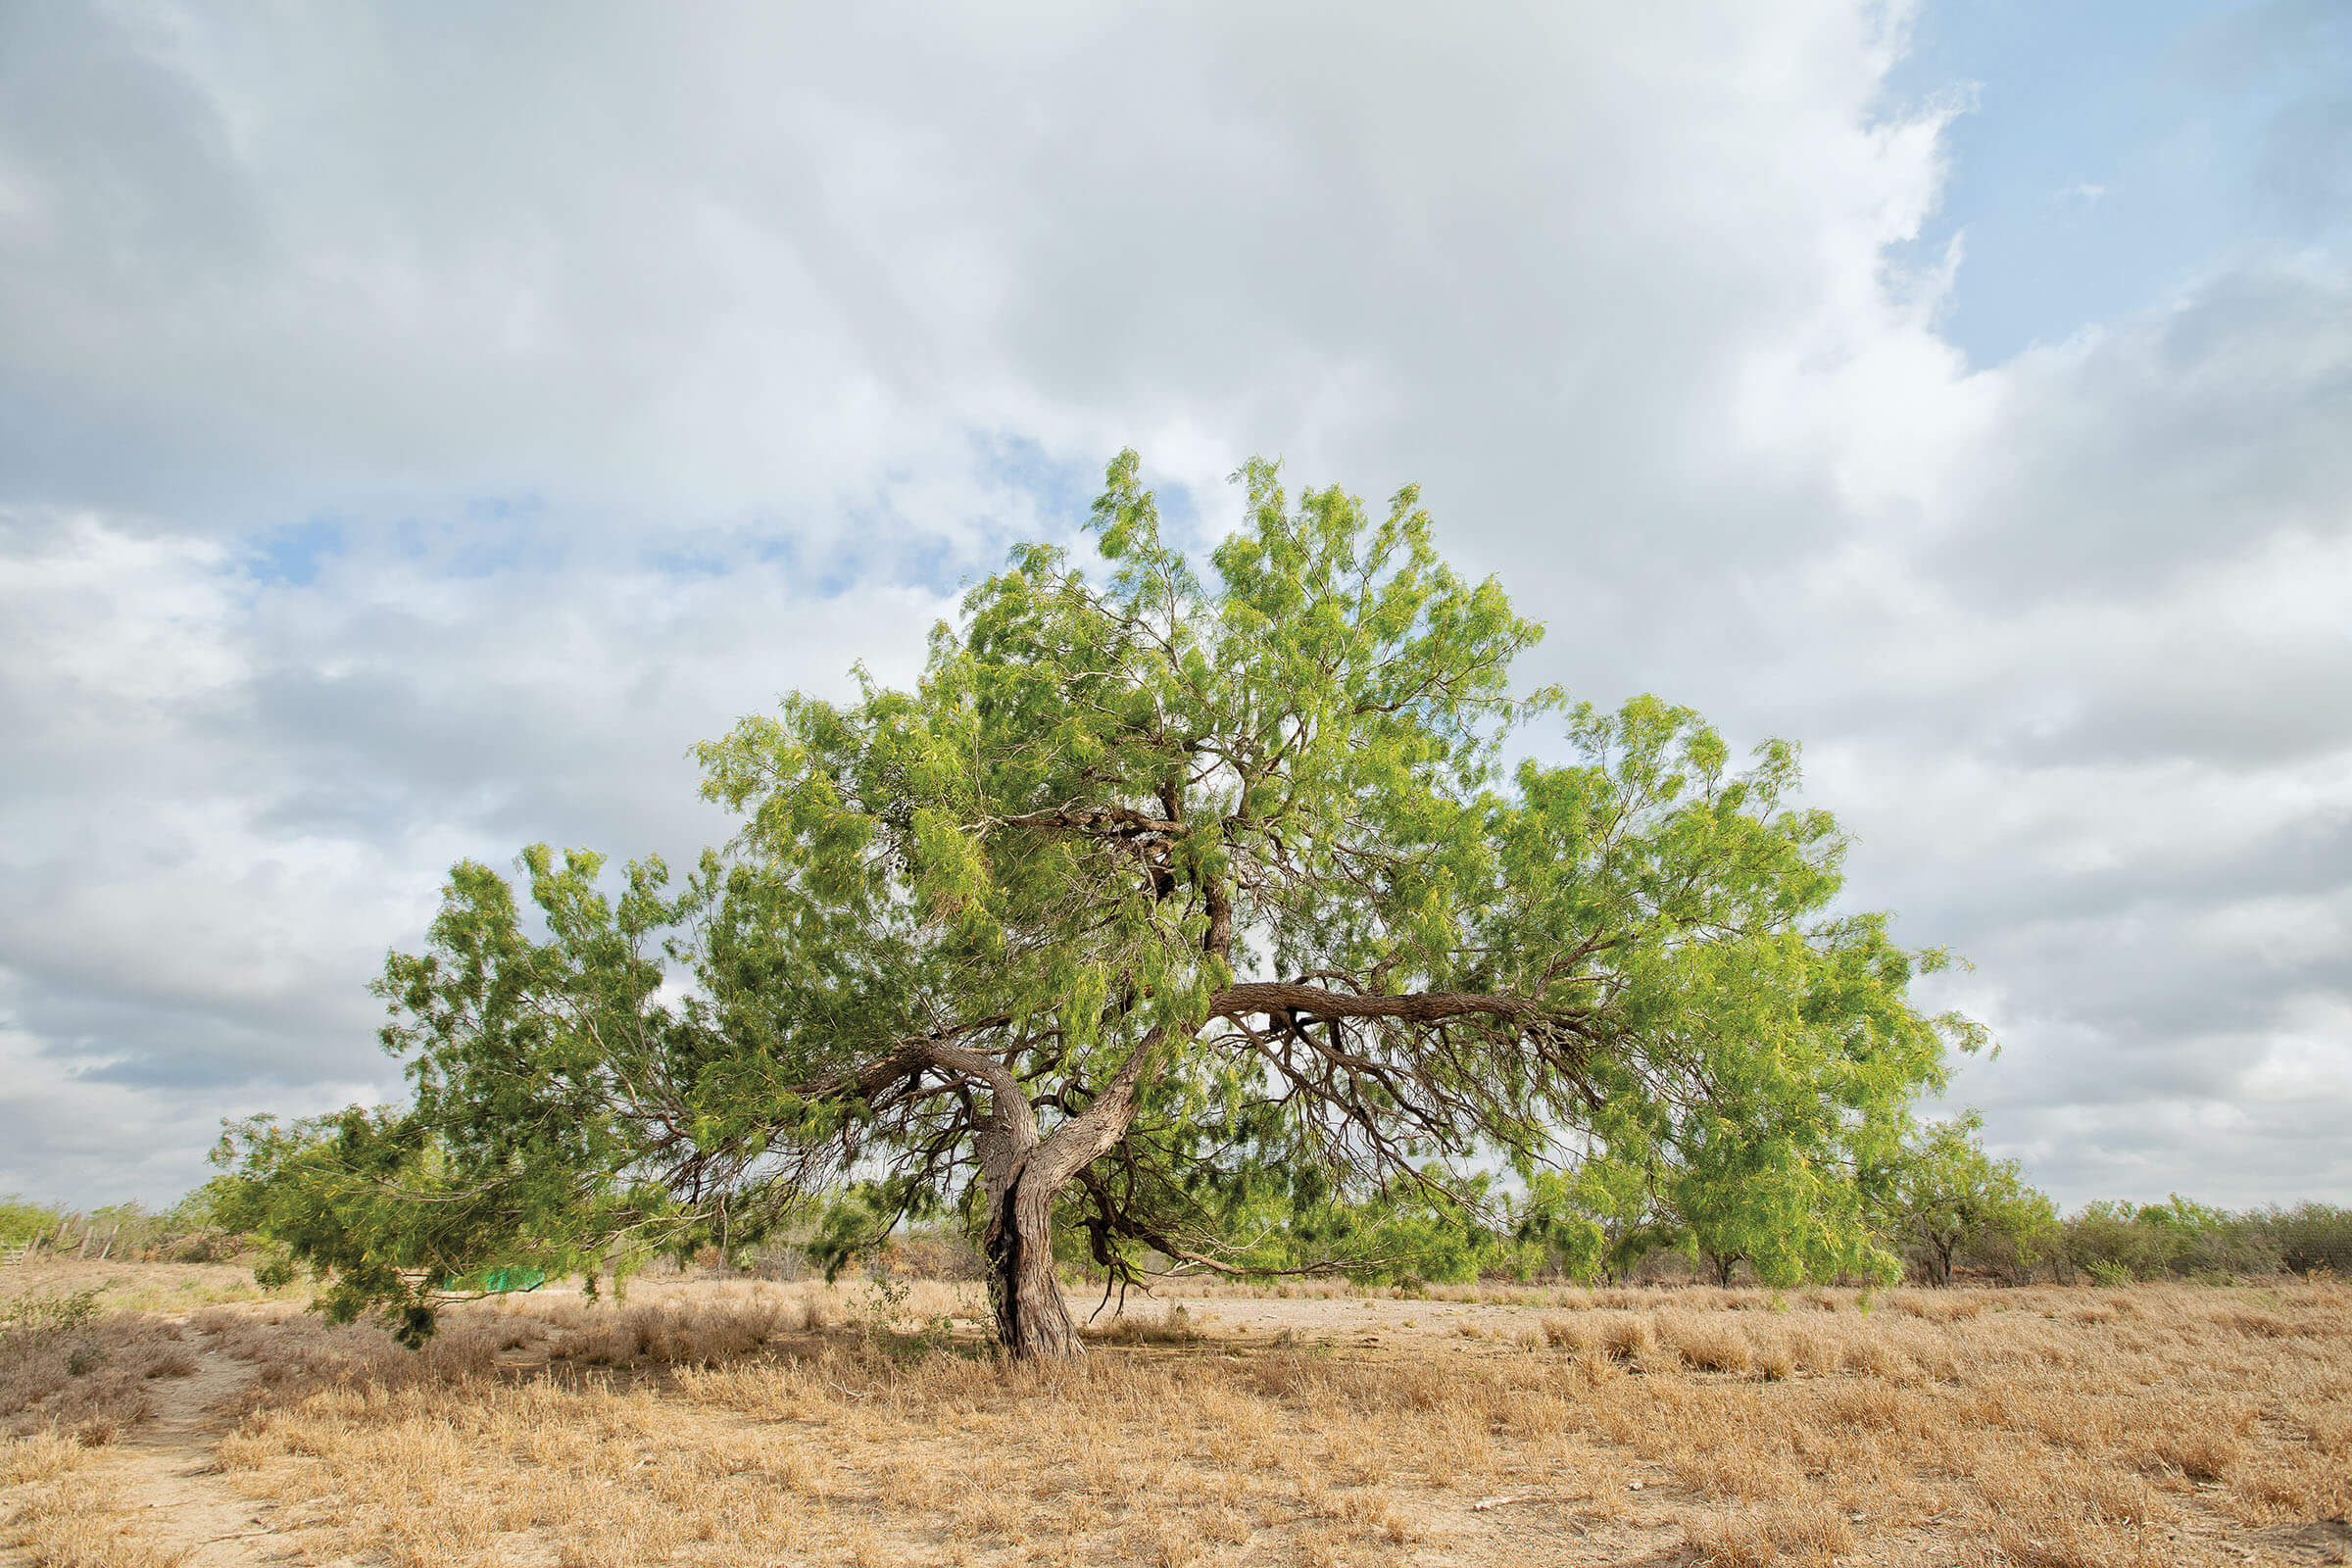 A large green and brown mesquite tree grows on a dry landscape